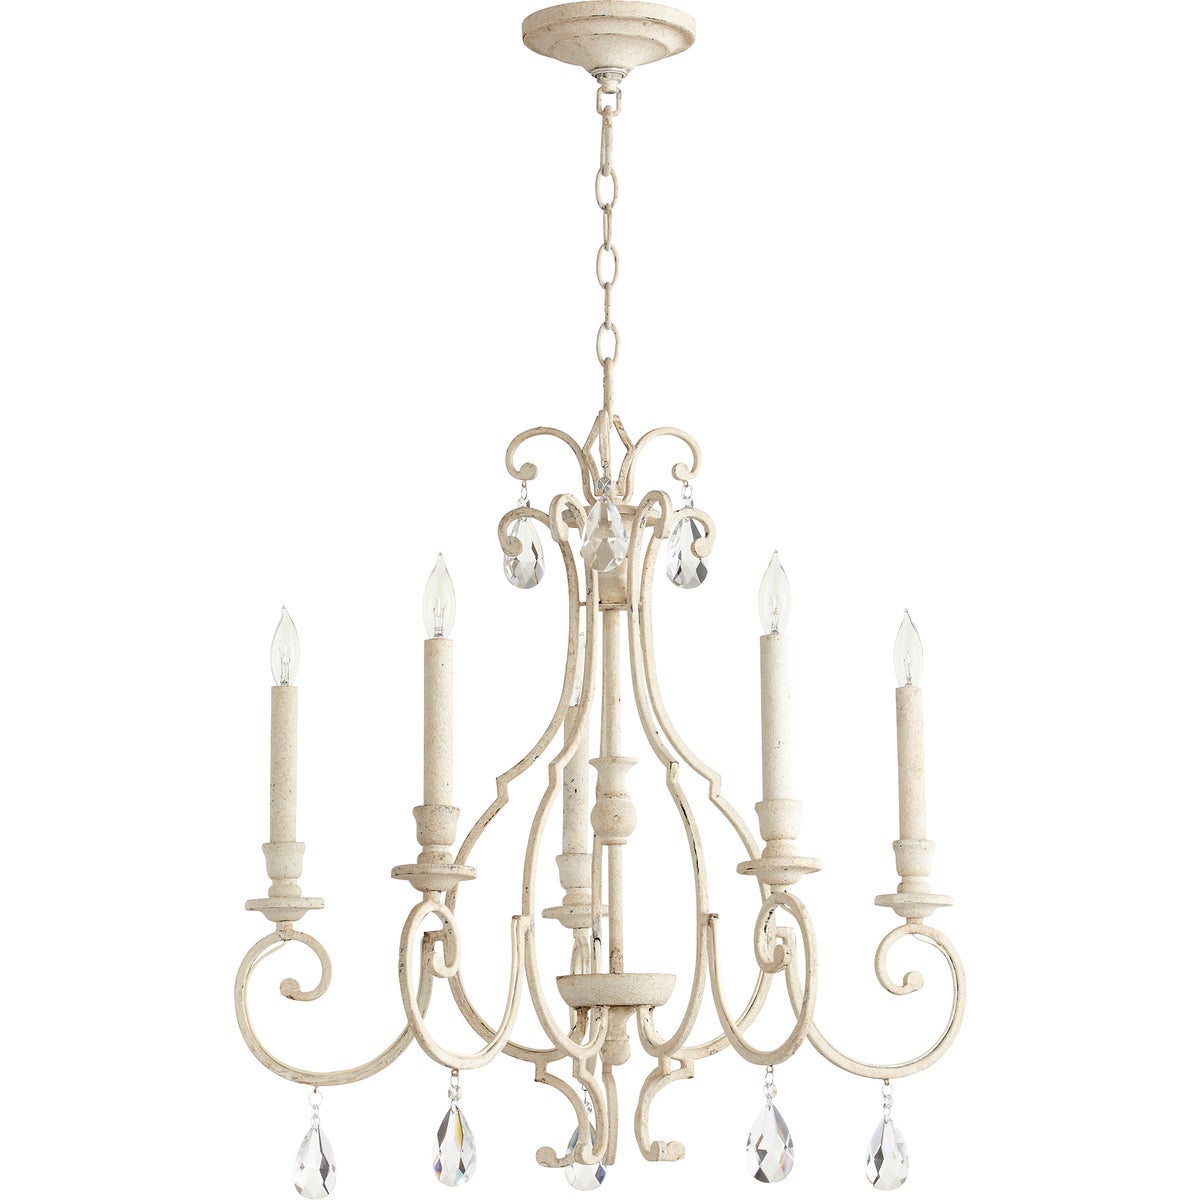 Bedroom chandelier with crystal lights, combining traditional frame and elegant ornamentation. A statement piece that adds a touch of history to your décor.